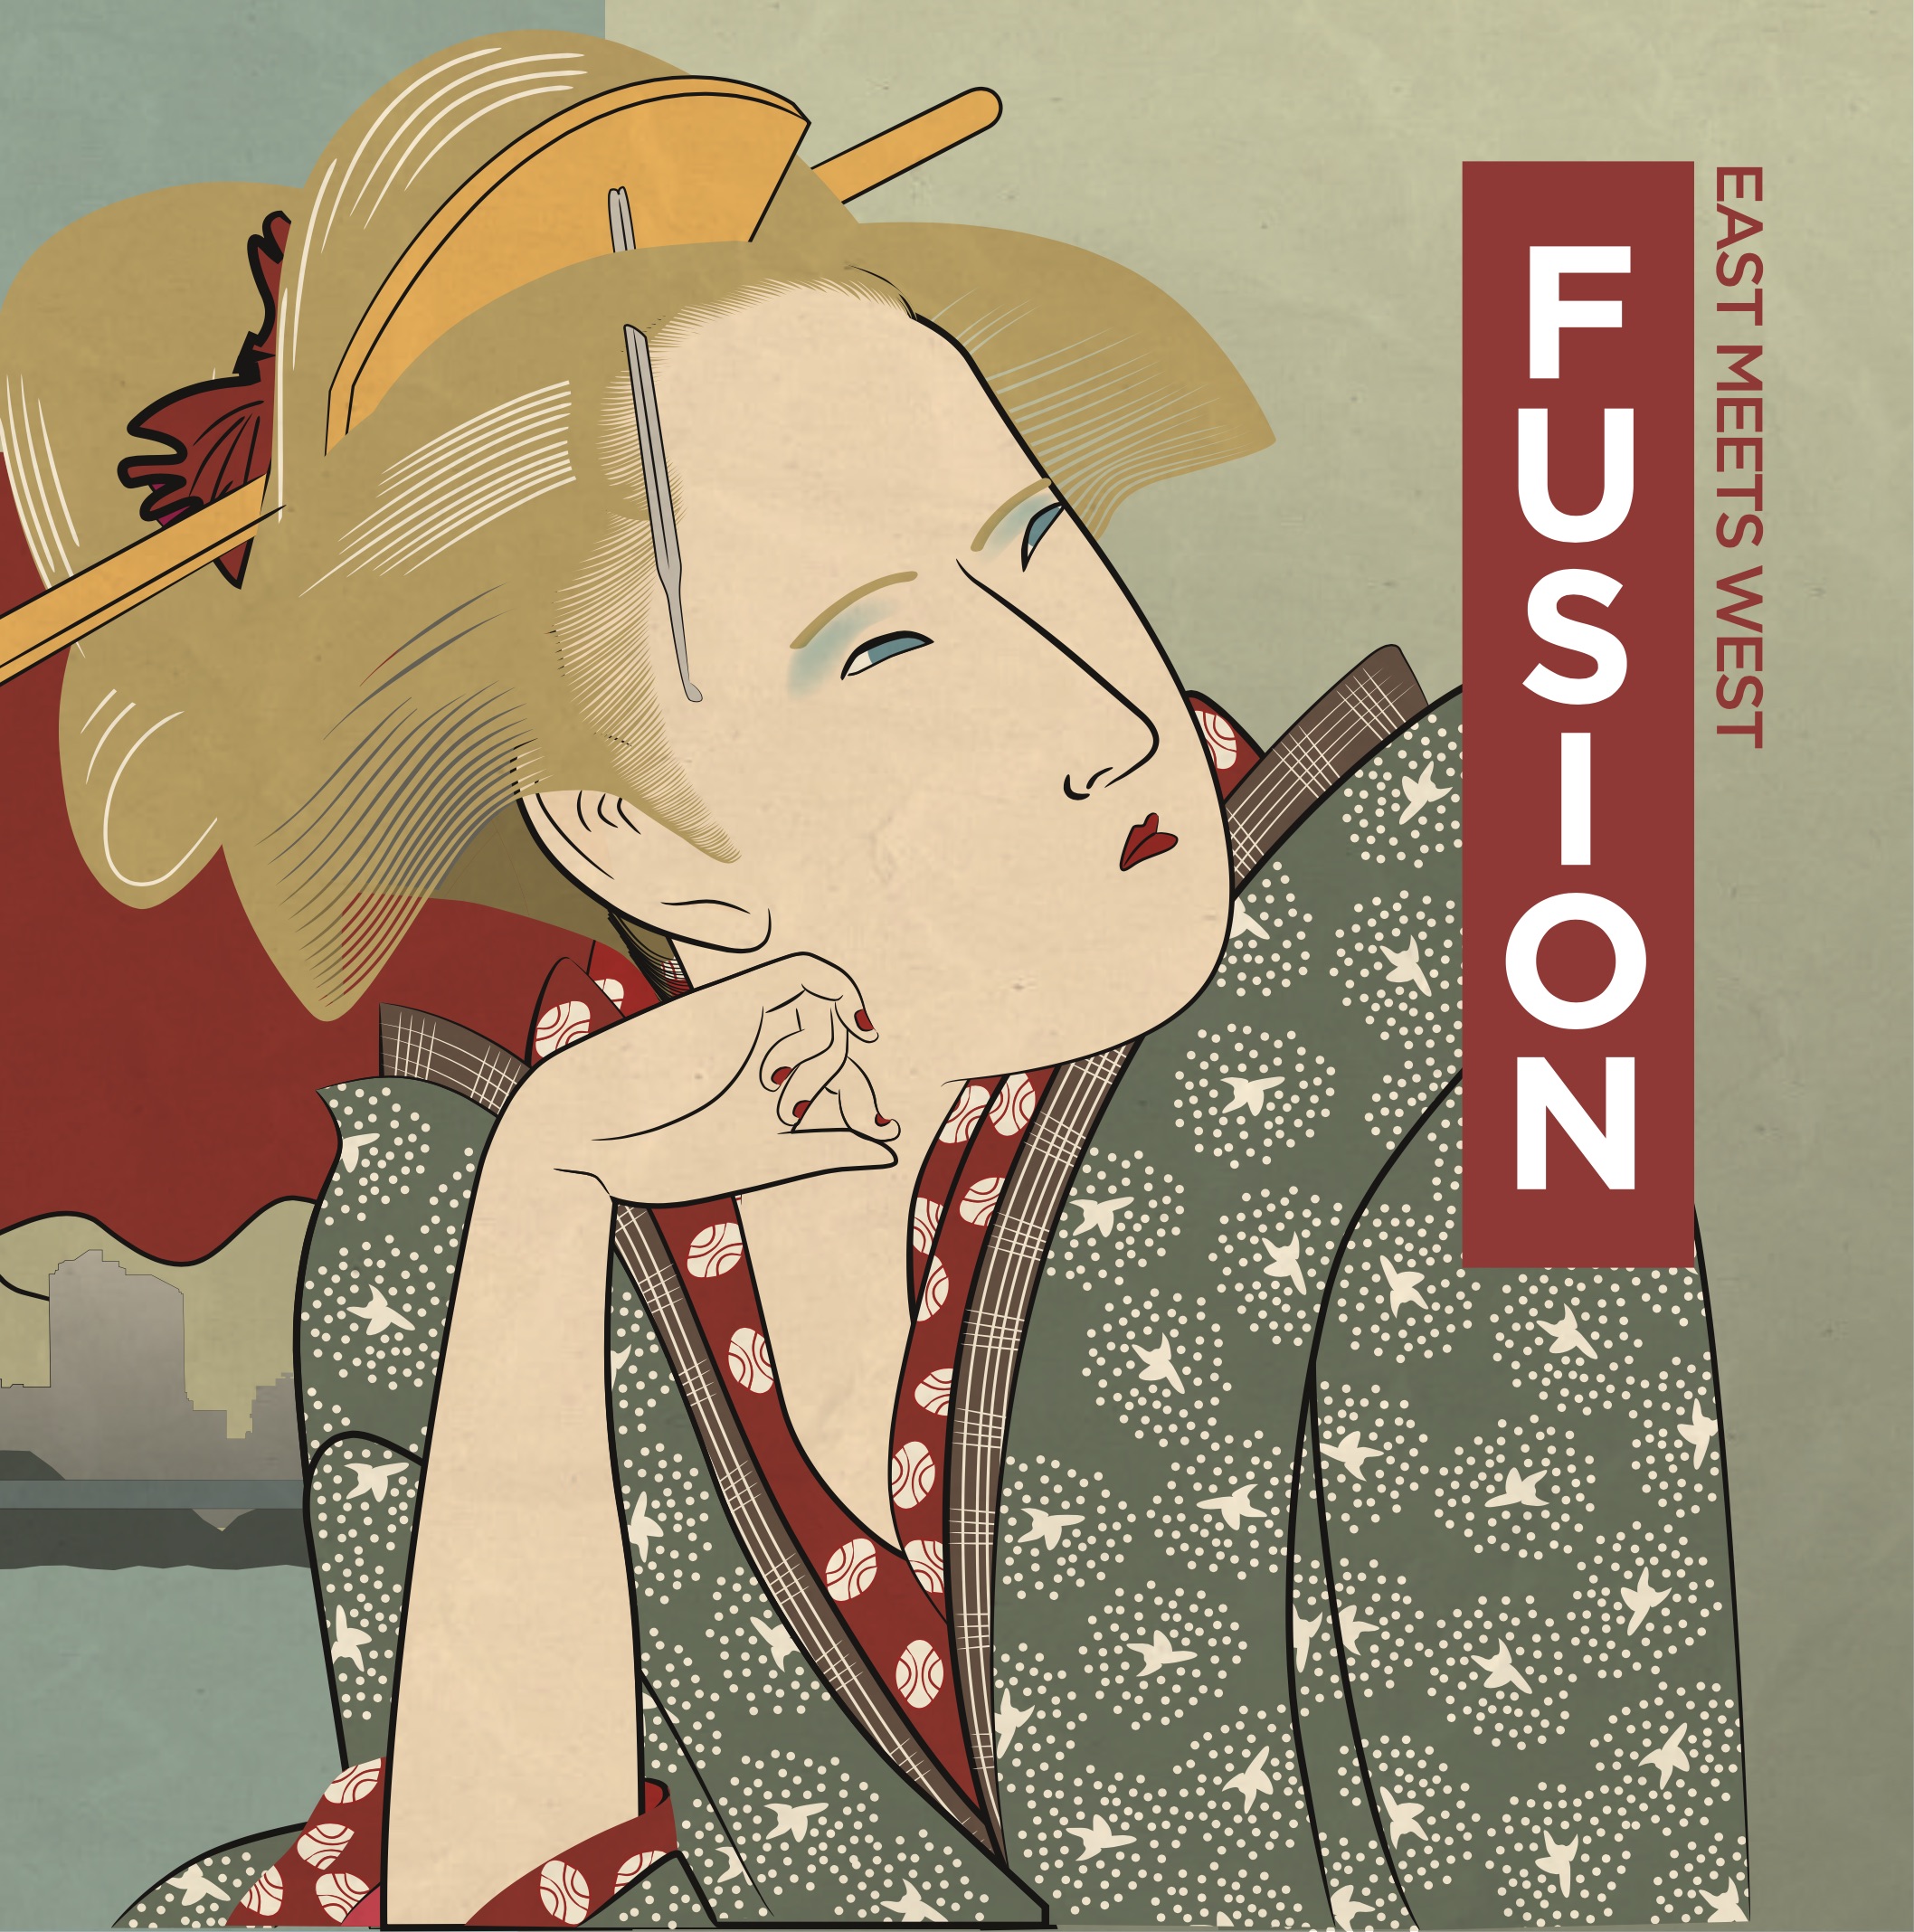 Fusion- East Meets West